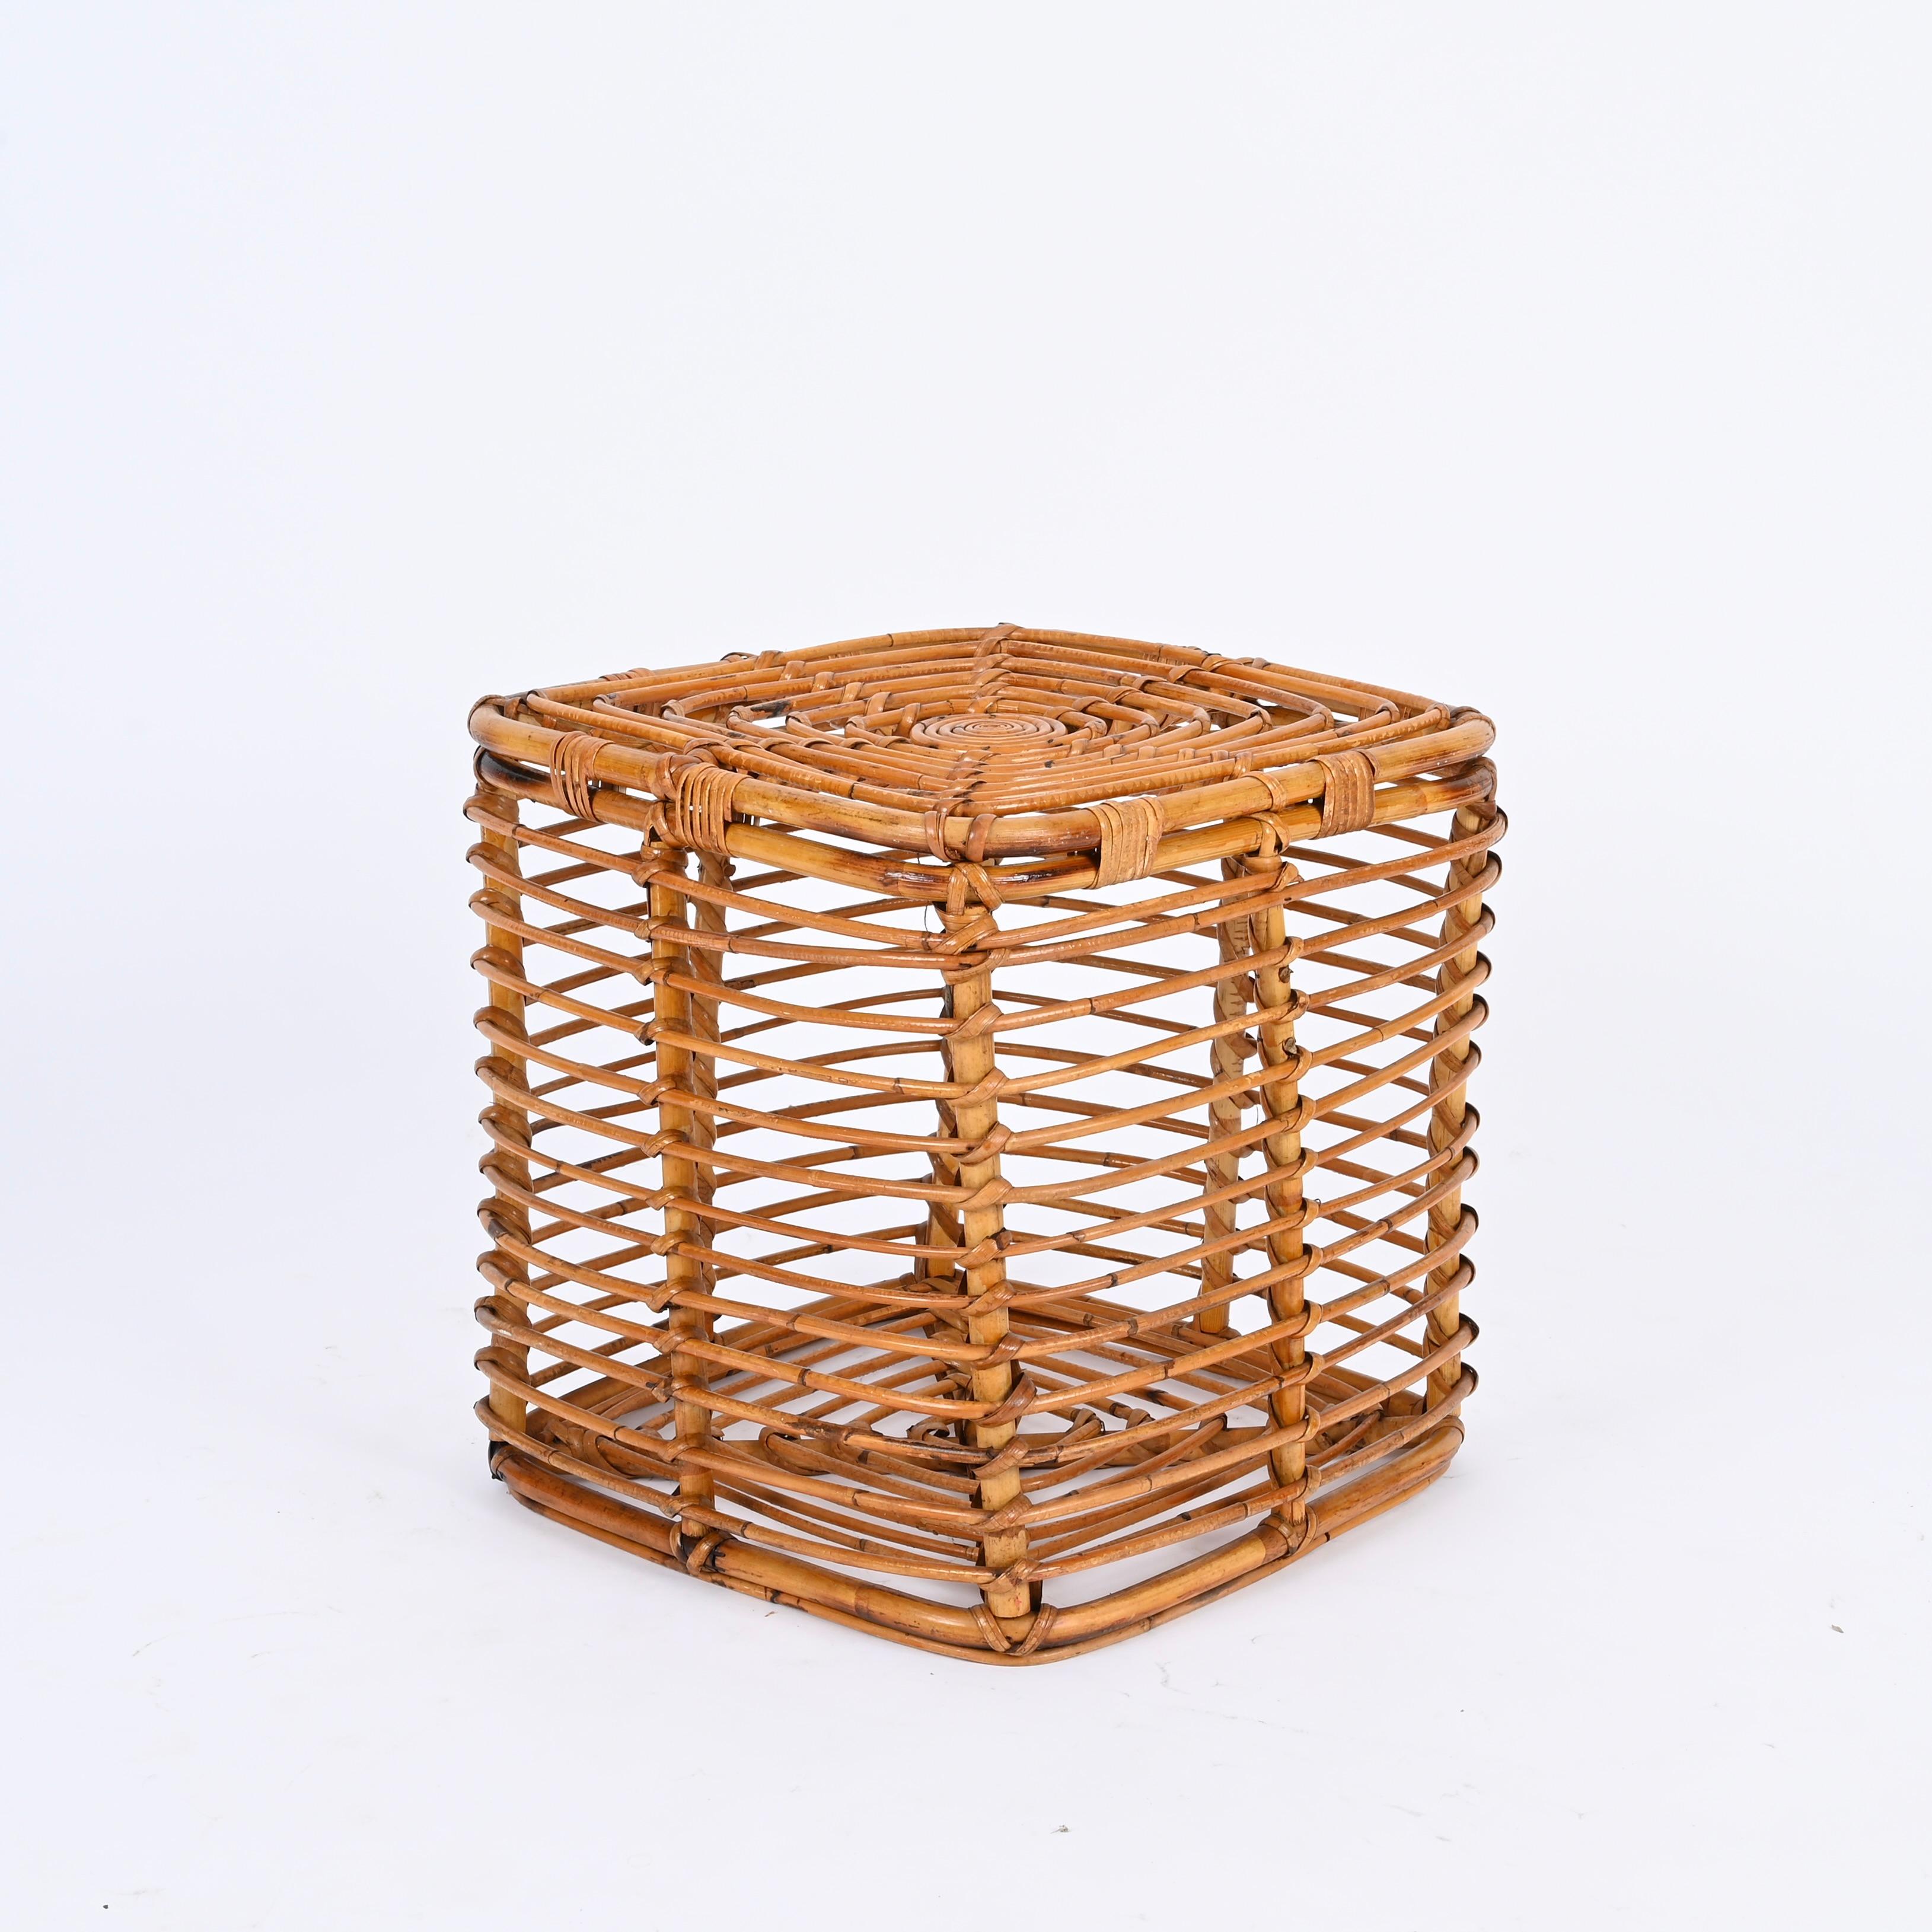 Hand-Crafted Midcentury Tito Agnoli Rattan and Wicker Square Pouf Stool, Italy, 1970s For Sale